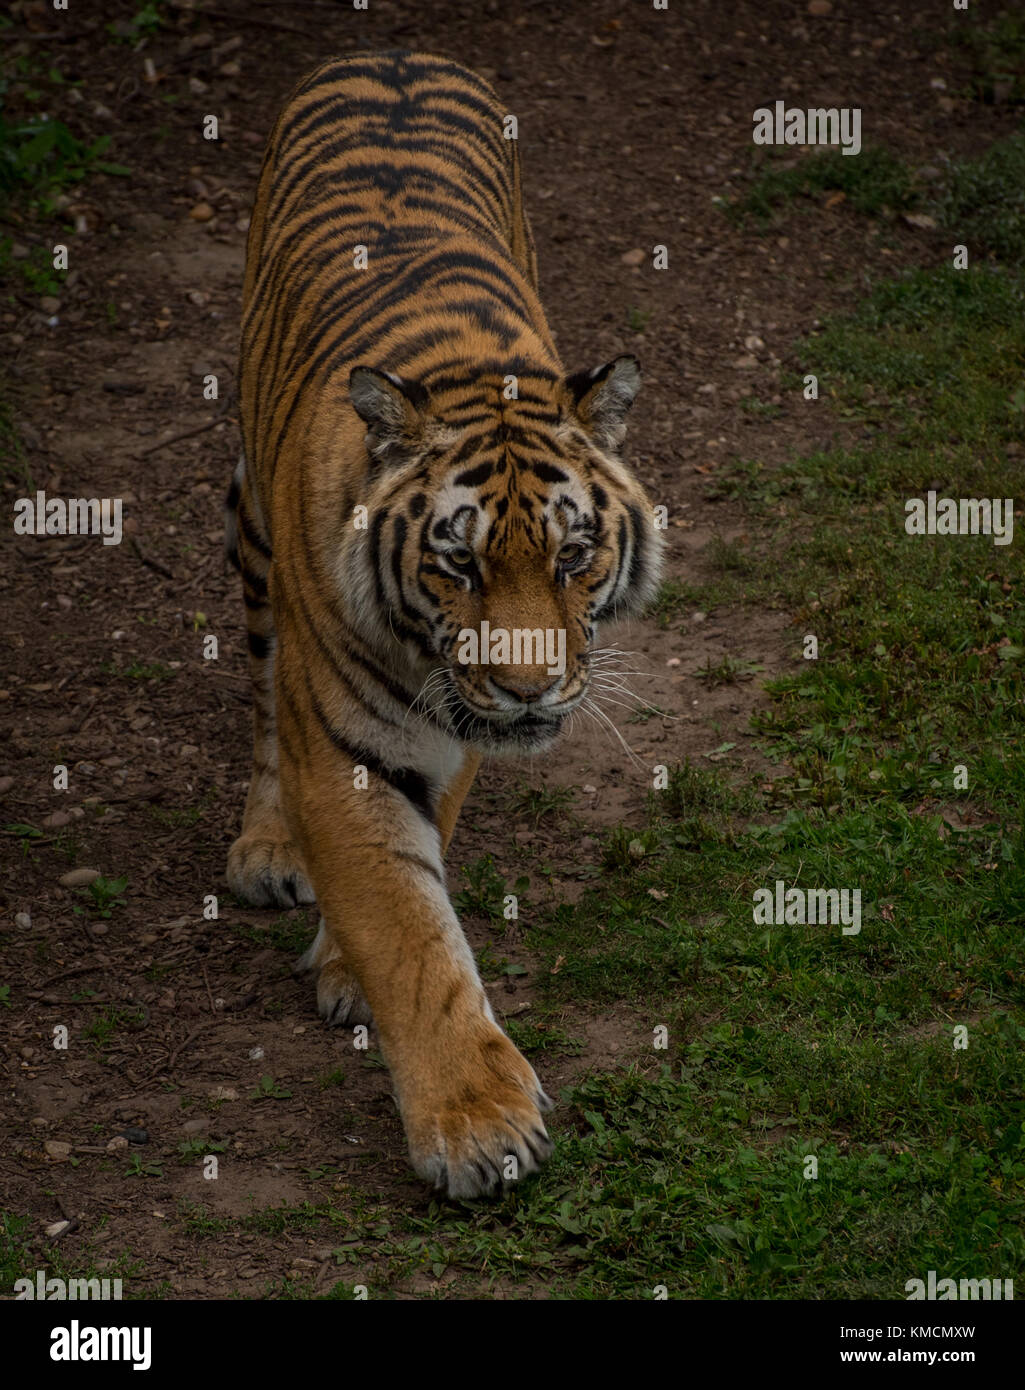 The Angry Tiger Stock Photo